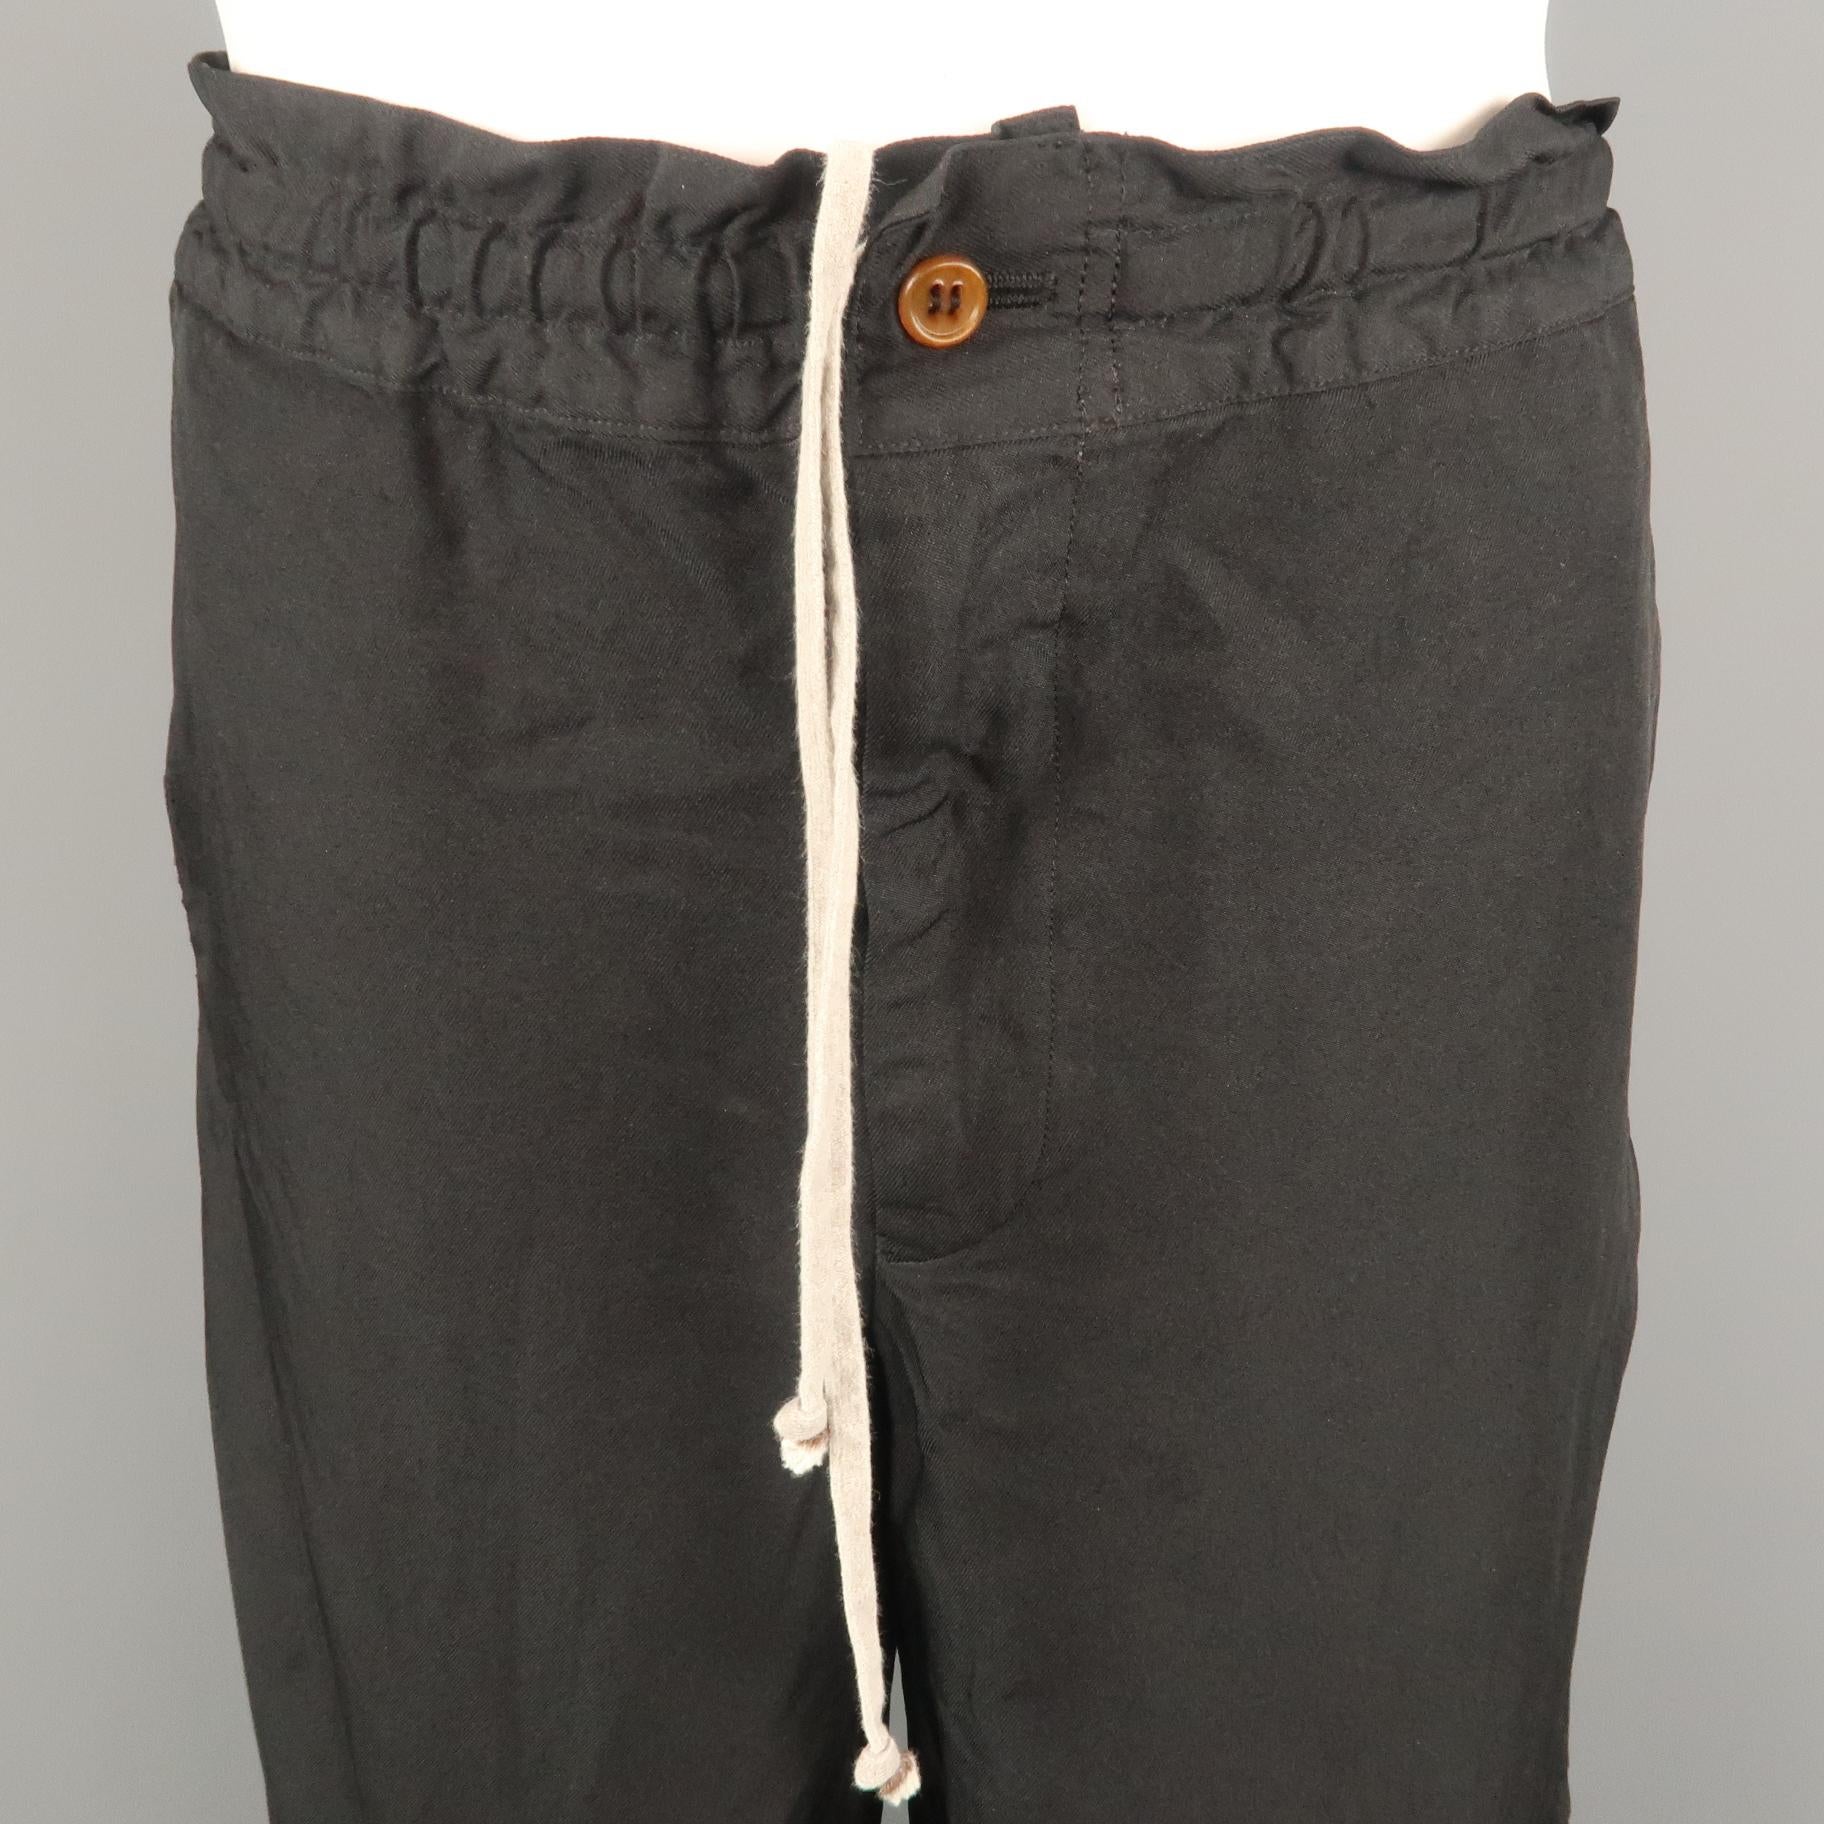 COMME des GARCONS HOMME PLUS casual pant comes in a black polyester featuring a regular fit and drawstring style. Made in Japan.
 
Very Good Pre-Owned Condition.
Marked: L
 
Measurements:
 
Waist: 34 in.
Rise: 10 in.
Inseam: 29 in.
